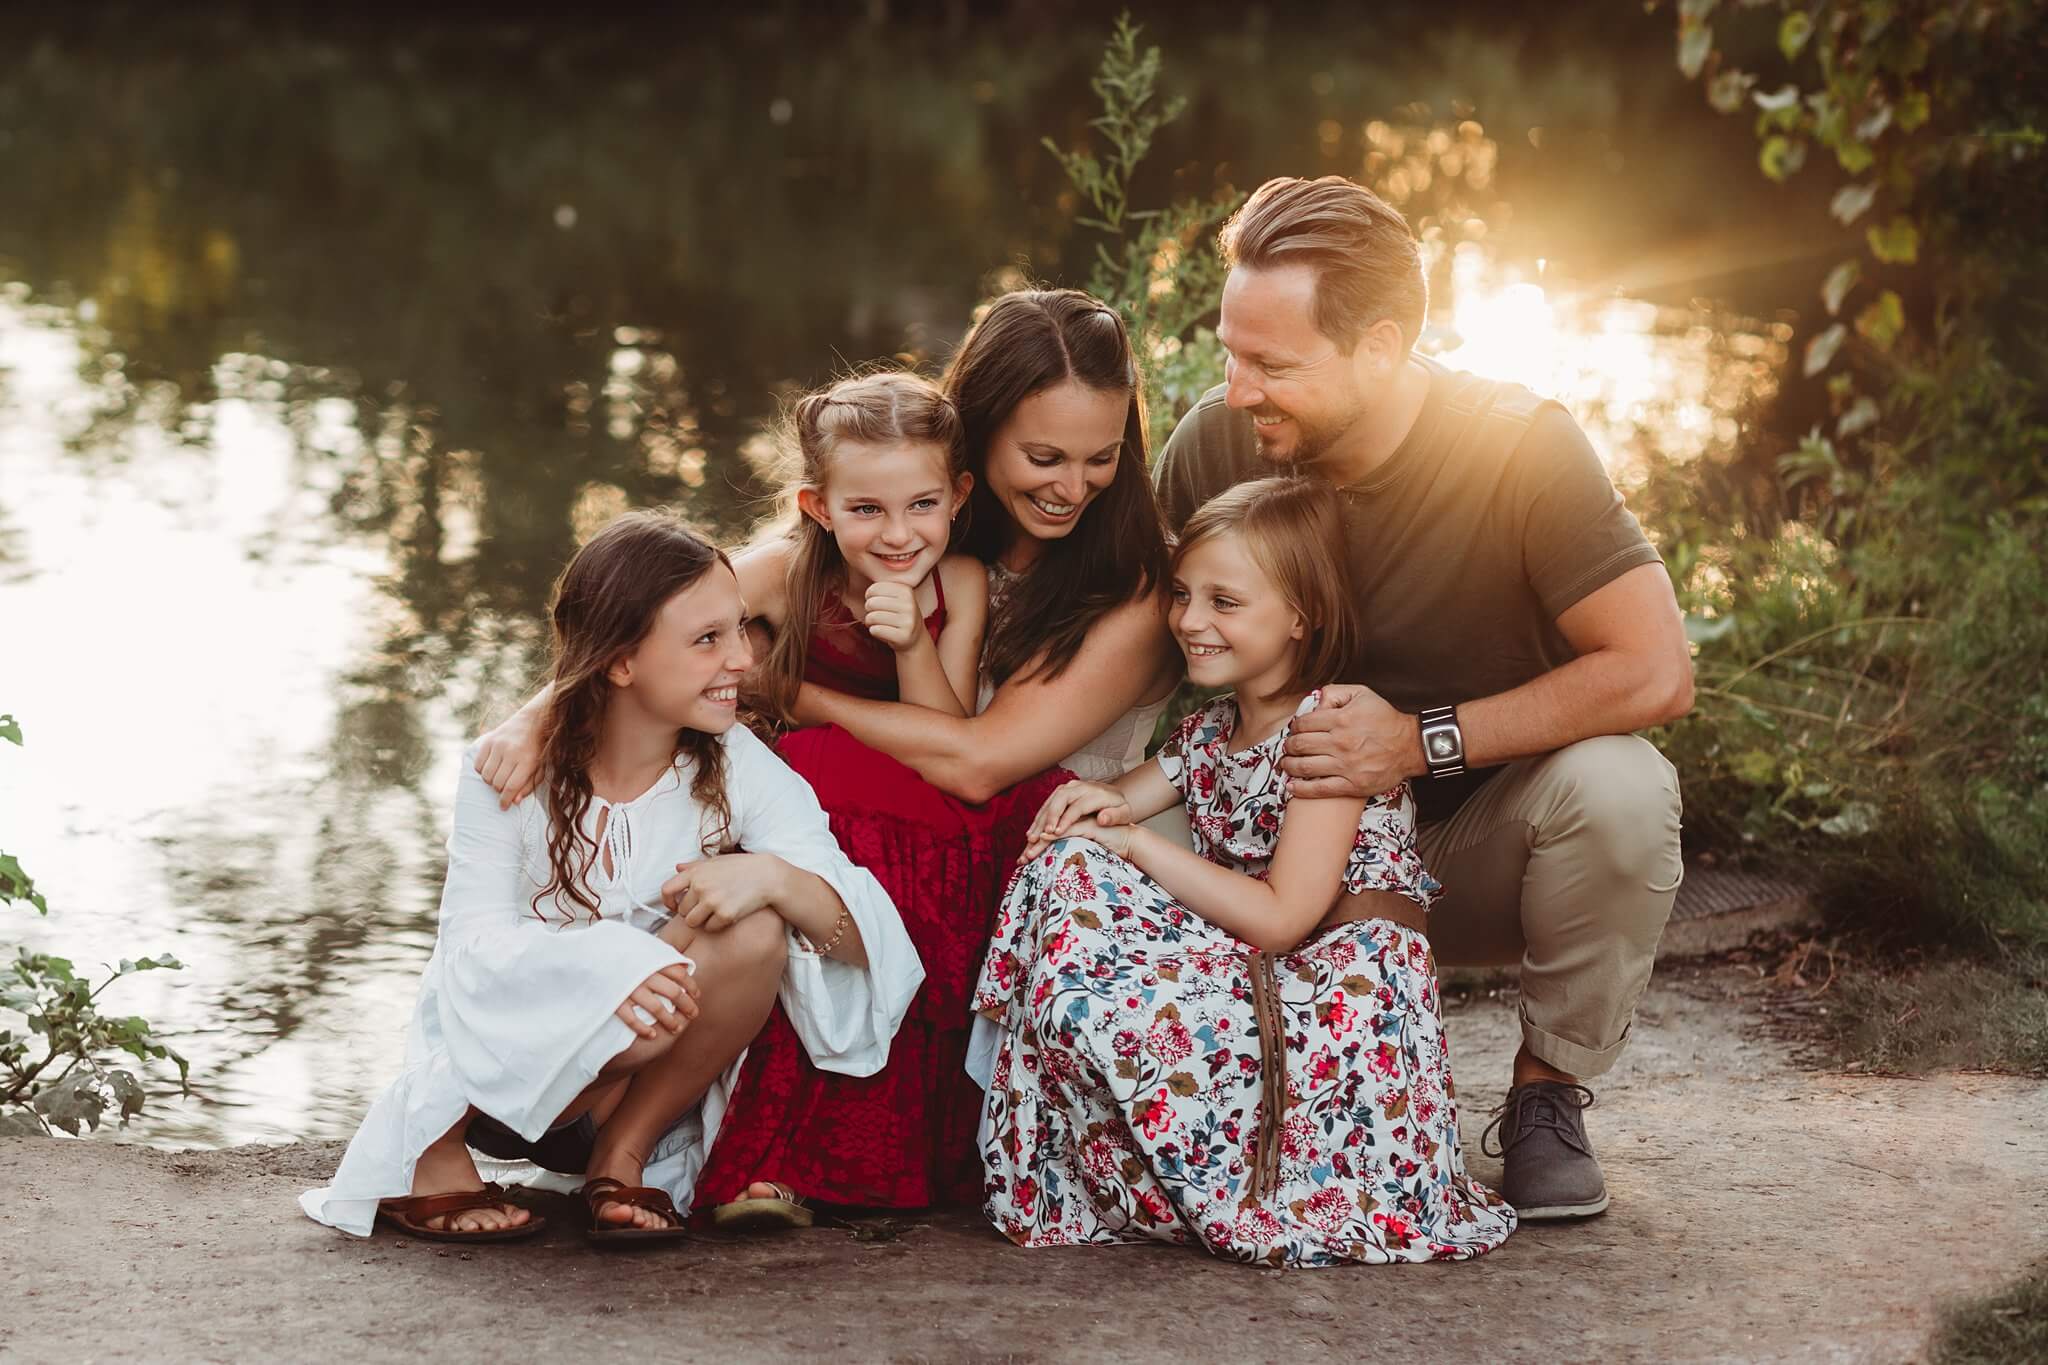 Photo by Toronto Family Photographer, Family snuggled together in front of water with the sun setting behind them